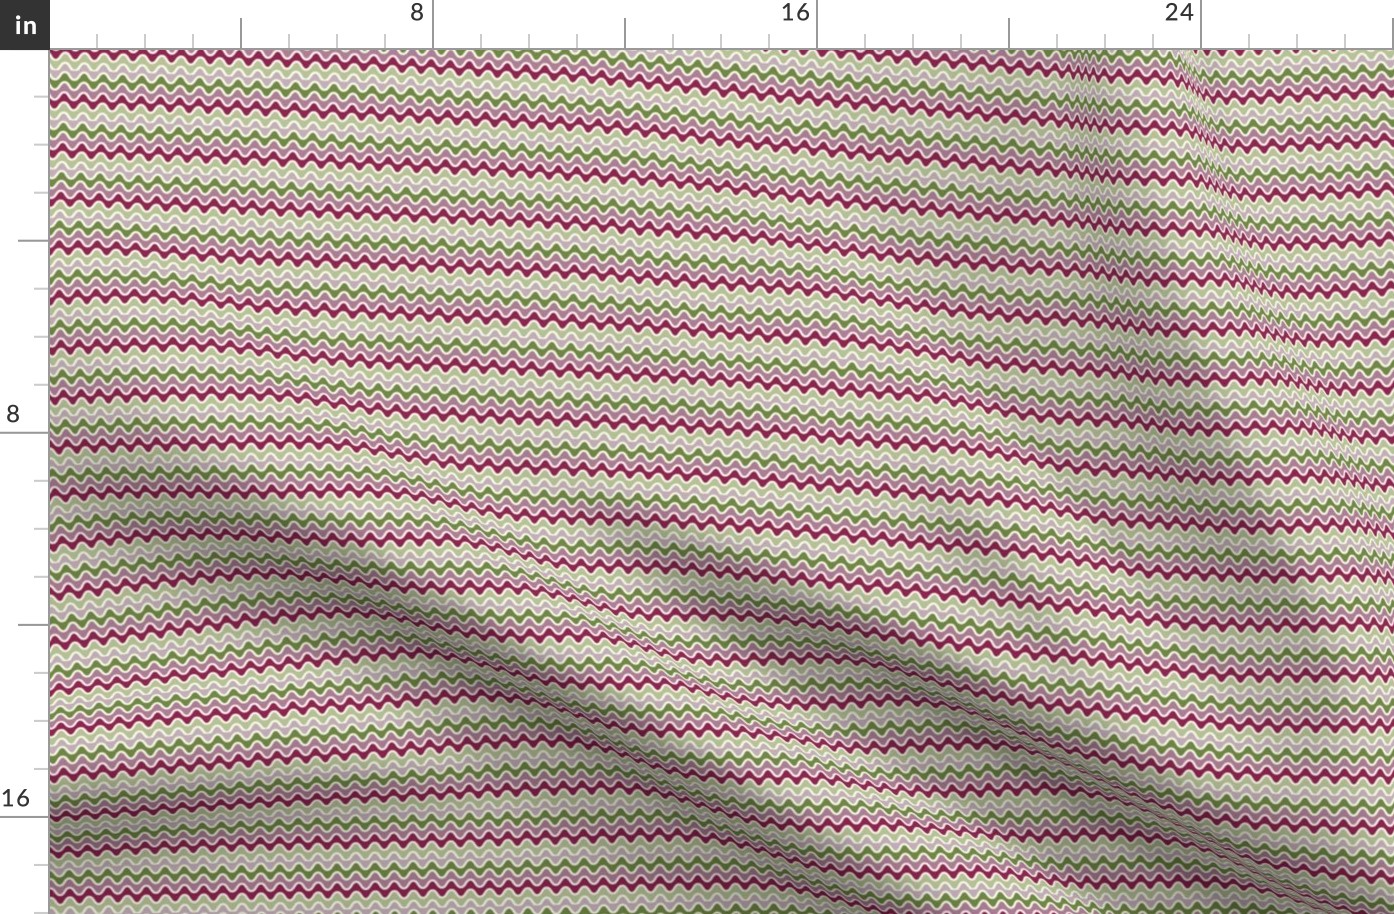 Groovy Wavy Zig Zags in Fig Colors: Extra Small